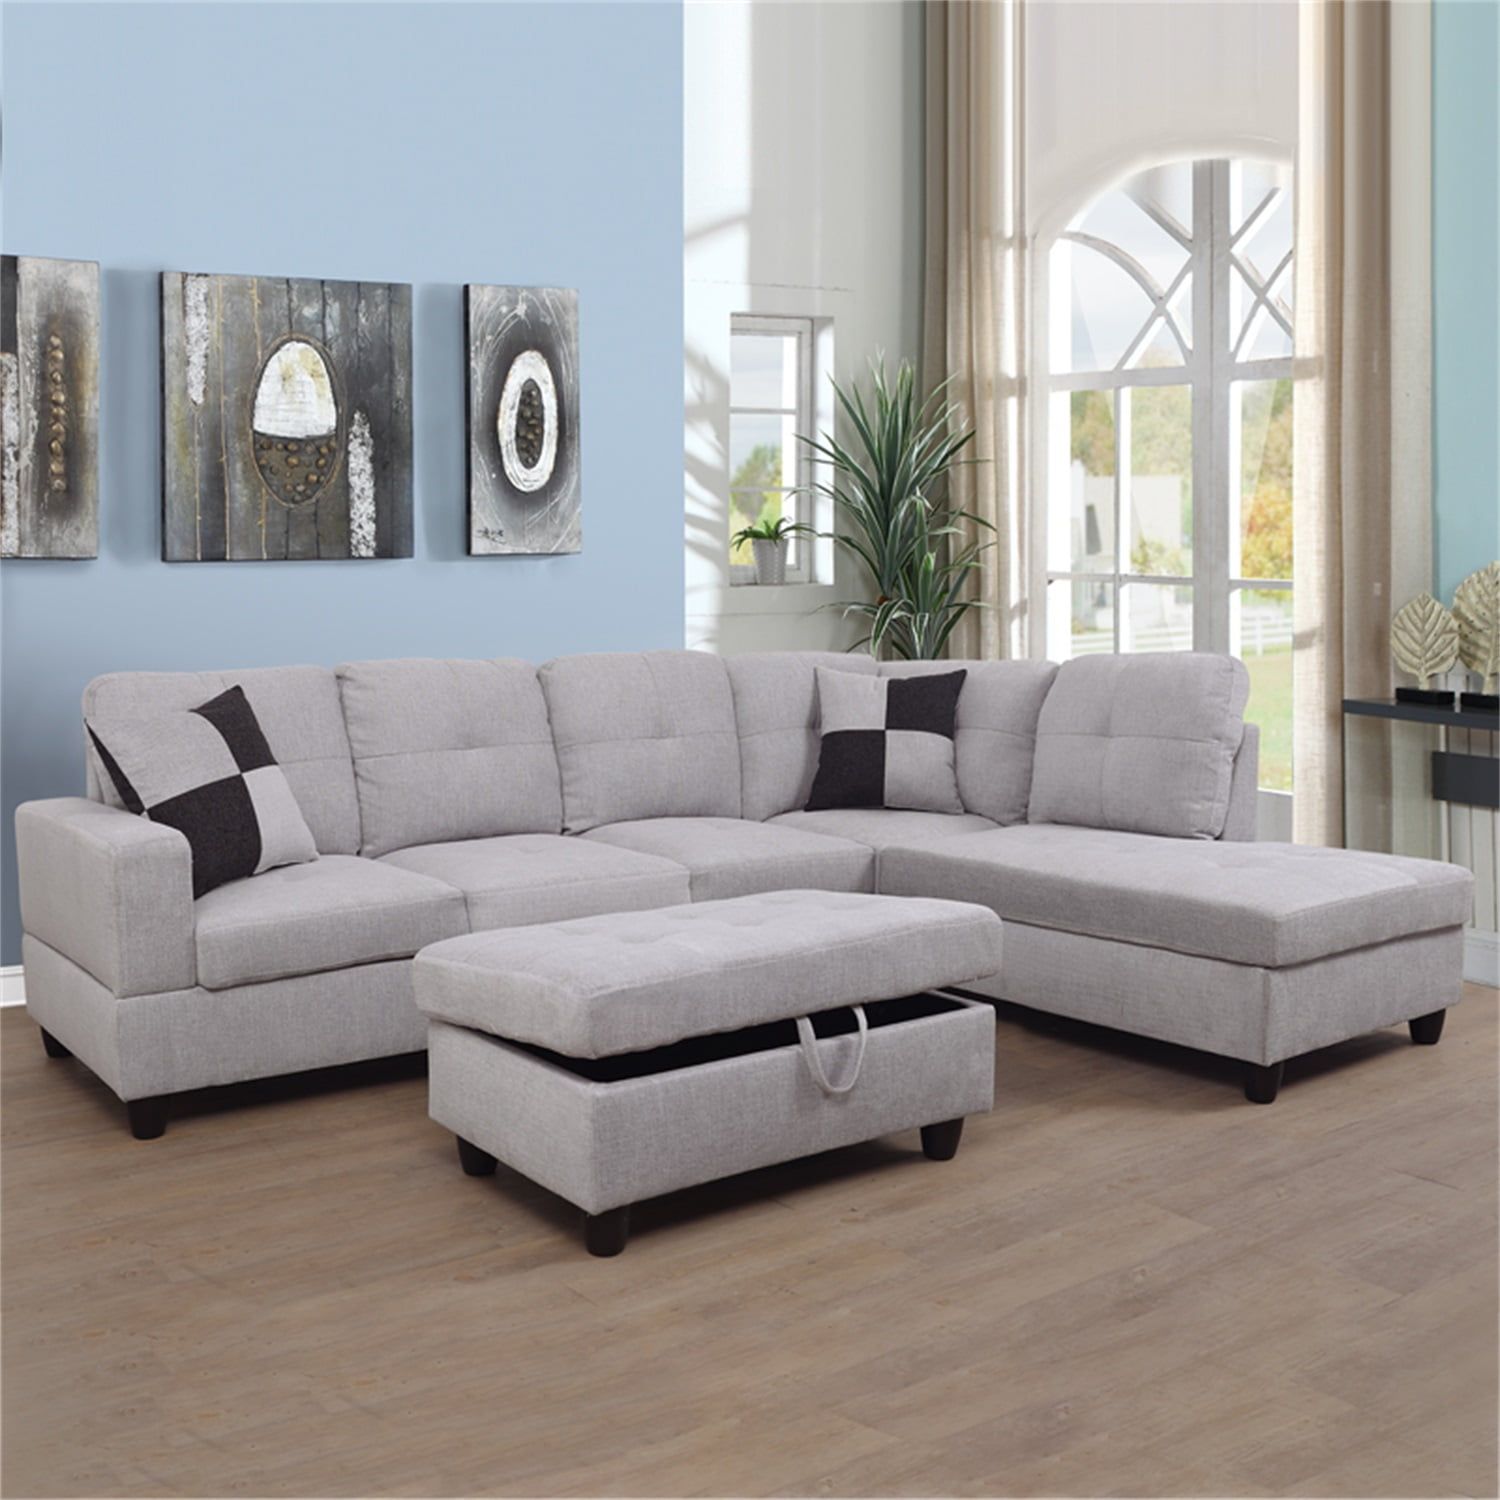 Hommoo Couch Sofa Set, Modern L Shaped Sofa For Living Room, Flannel Sectional  Sofa Set For Apartment, Off White(without Ottoman) – Walmart For Modern L Shaped Sofa Sectionals (View 2 of 13)